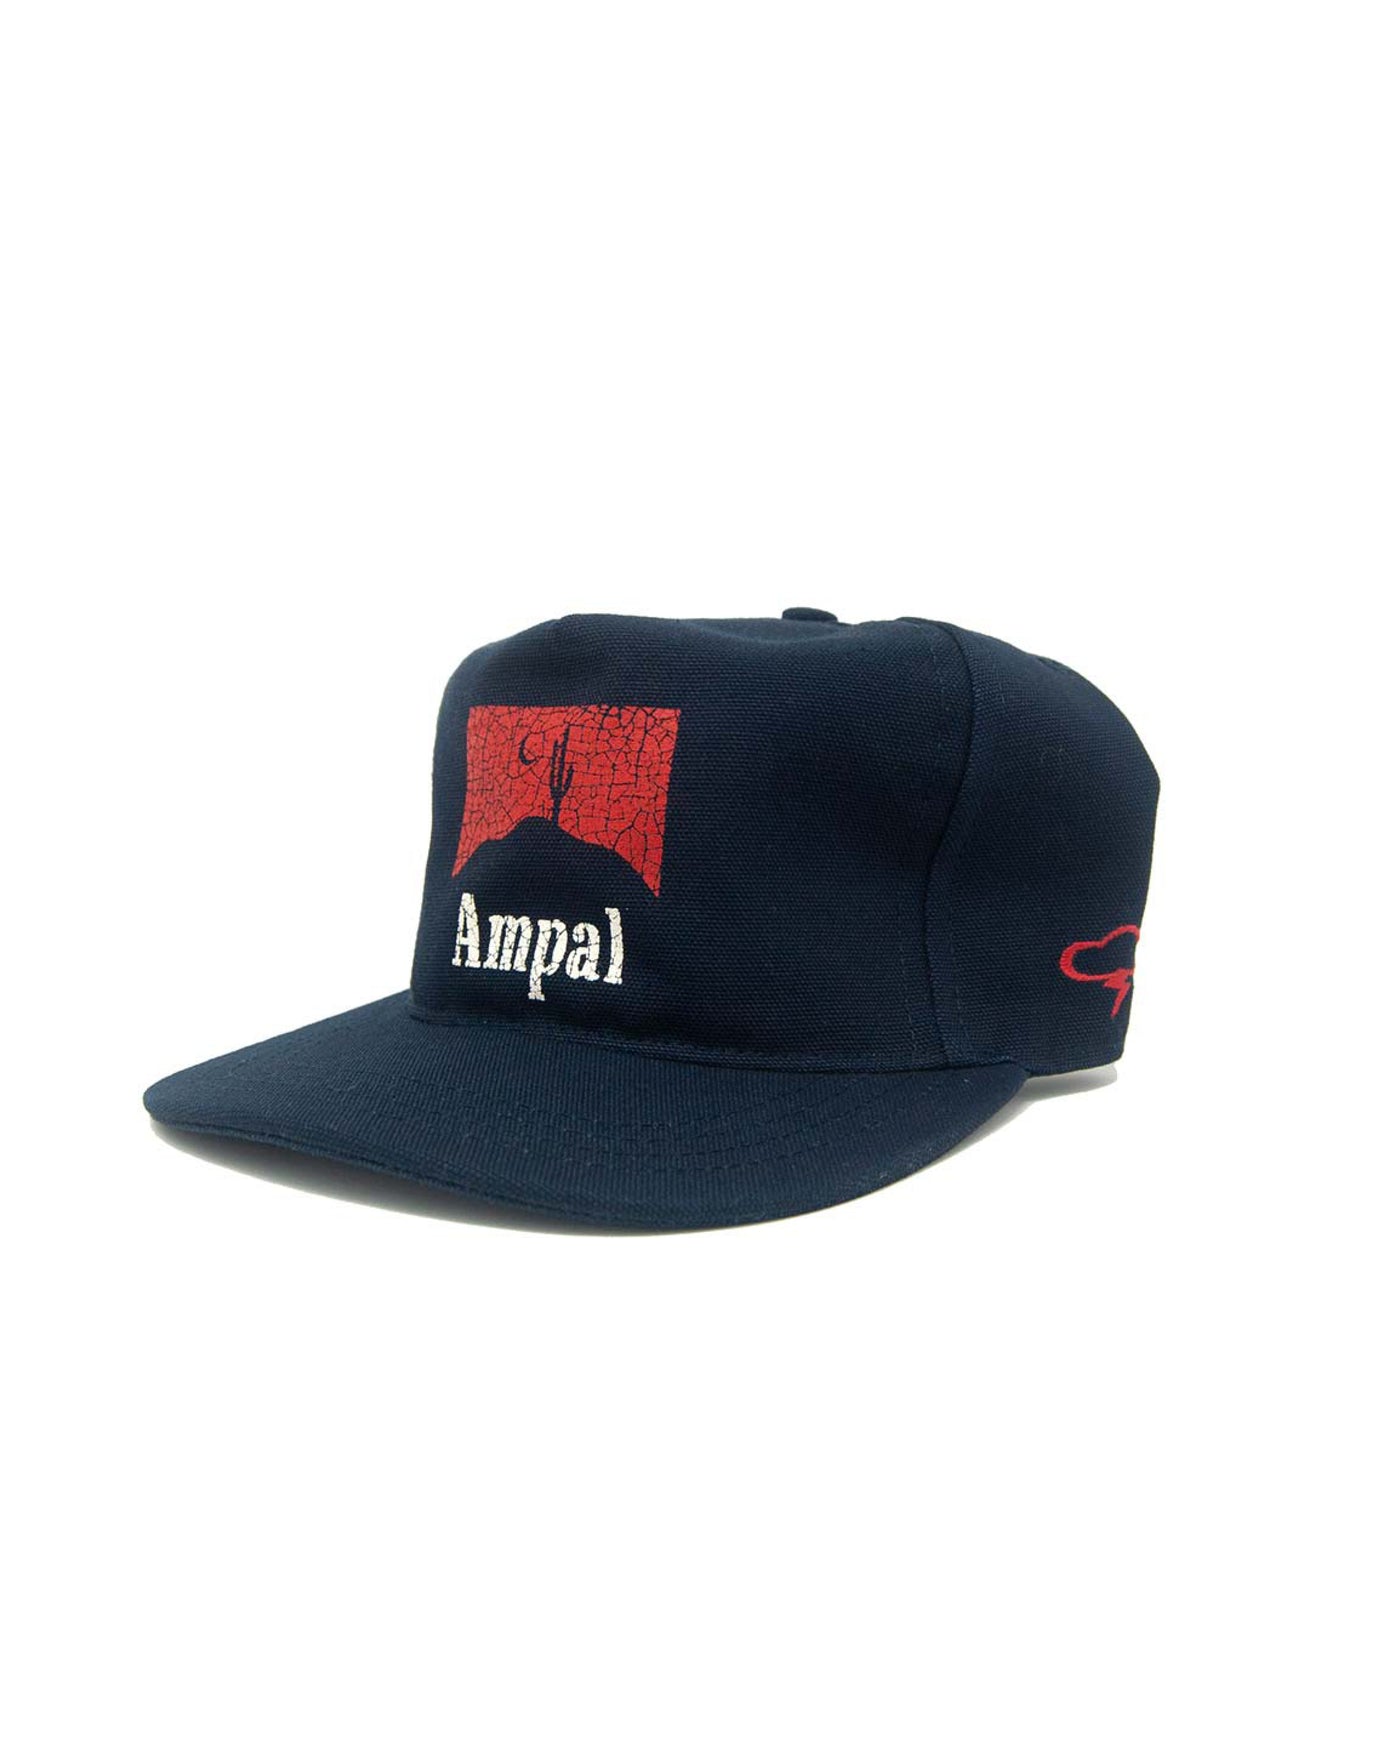 T.A.C Scorched II Strapback Navy